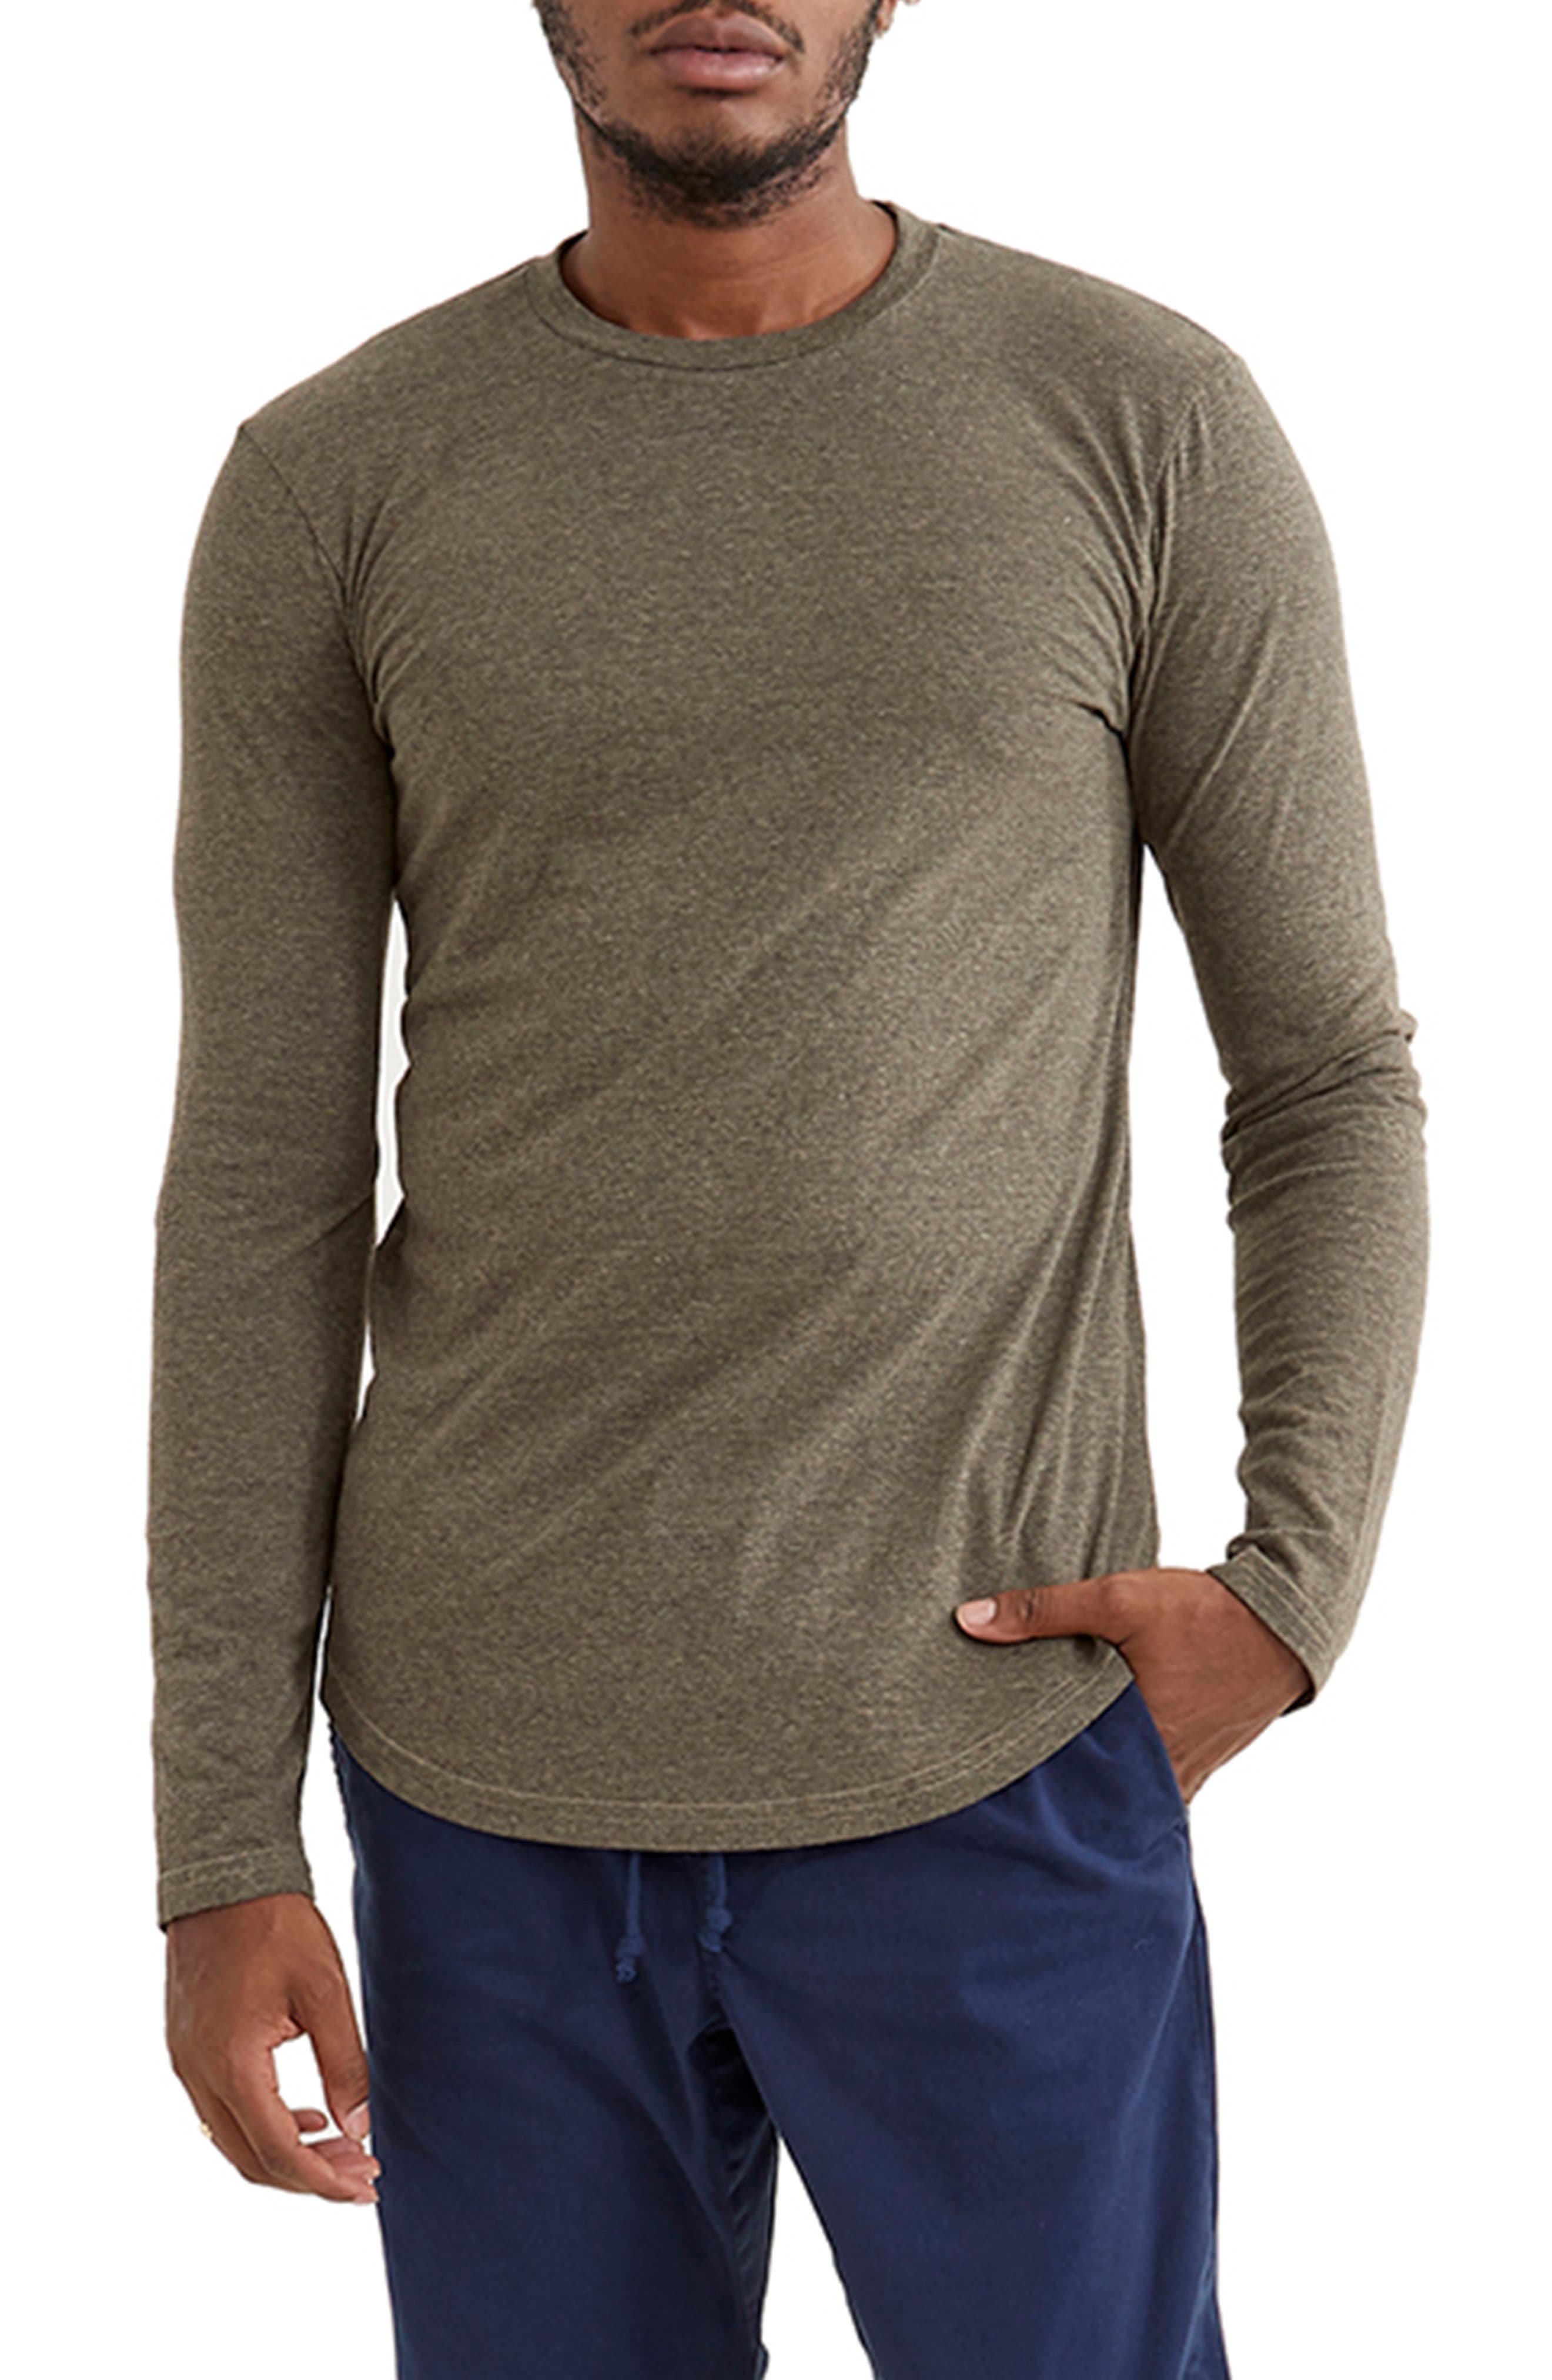 YUNY Mens Solid Round Neck Long-Sleeve Stripe Pullover Knitted Sweater Grey S